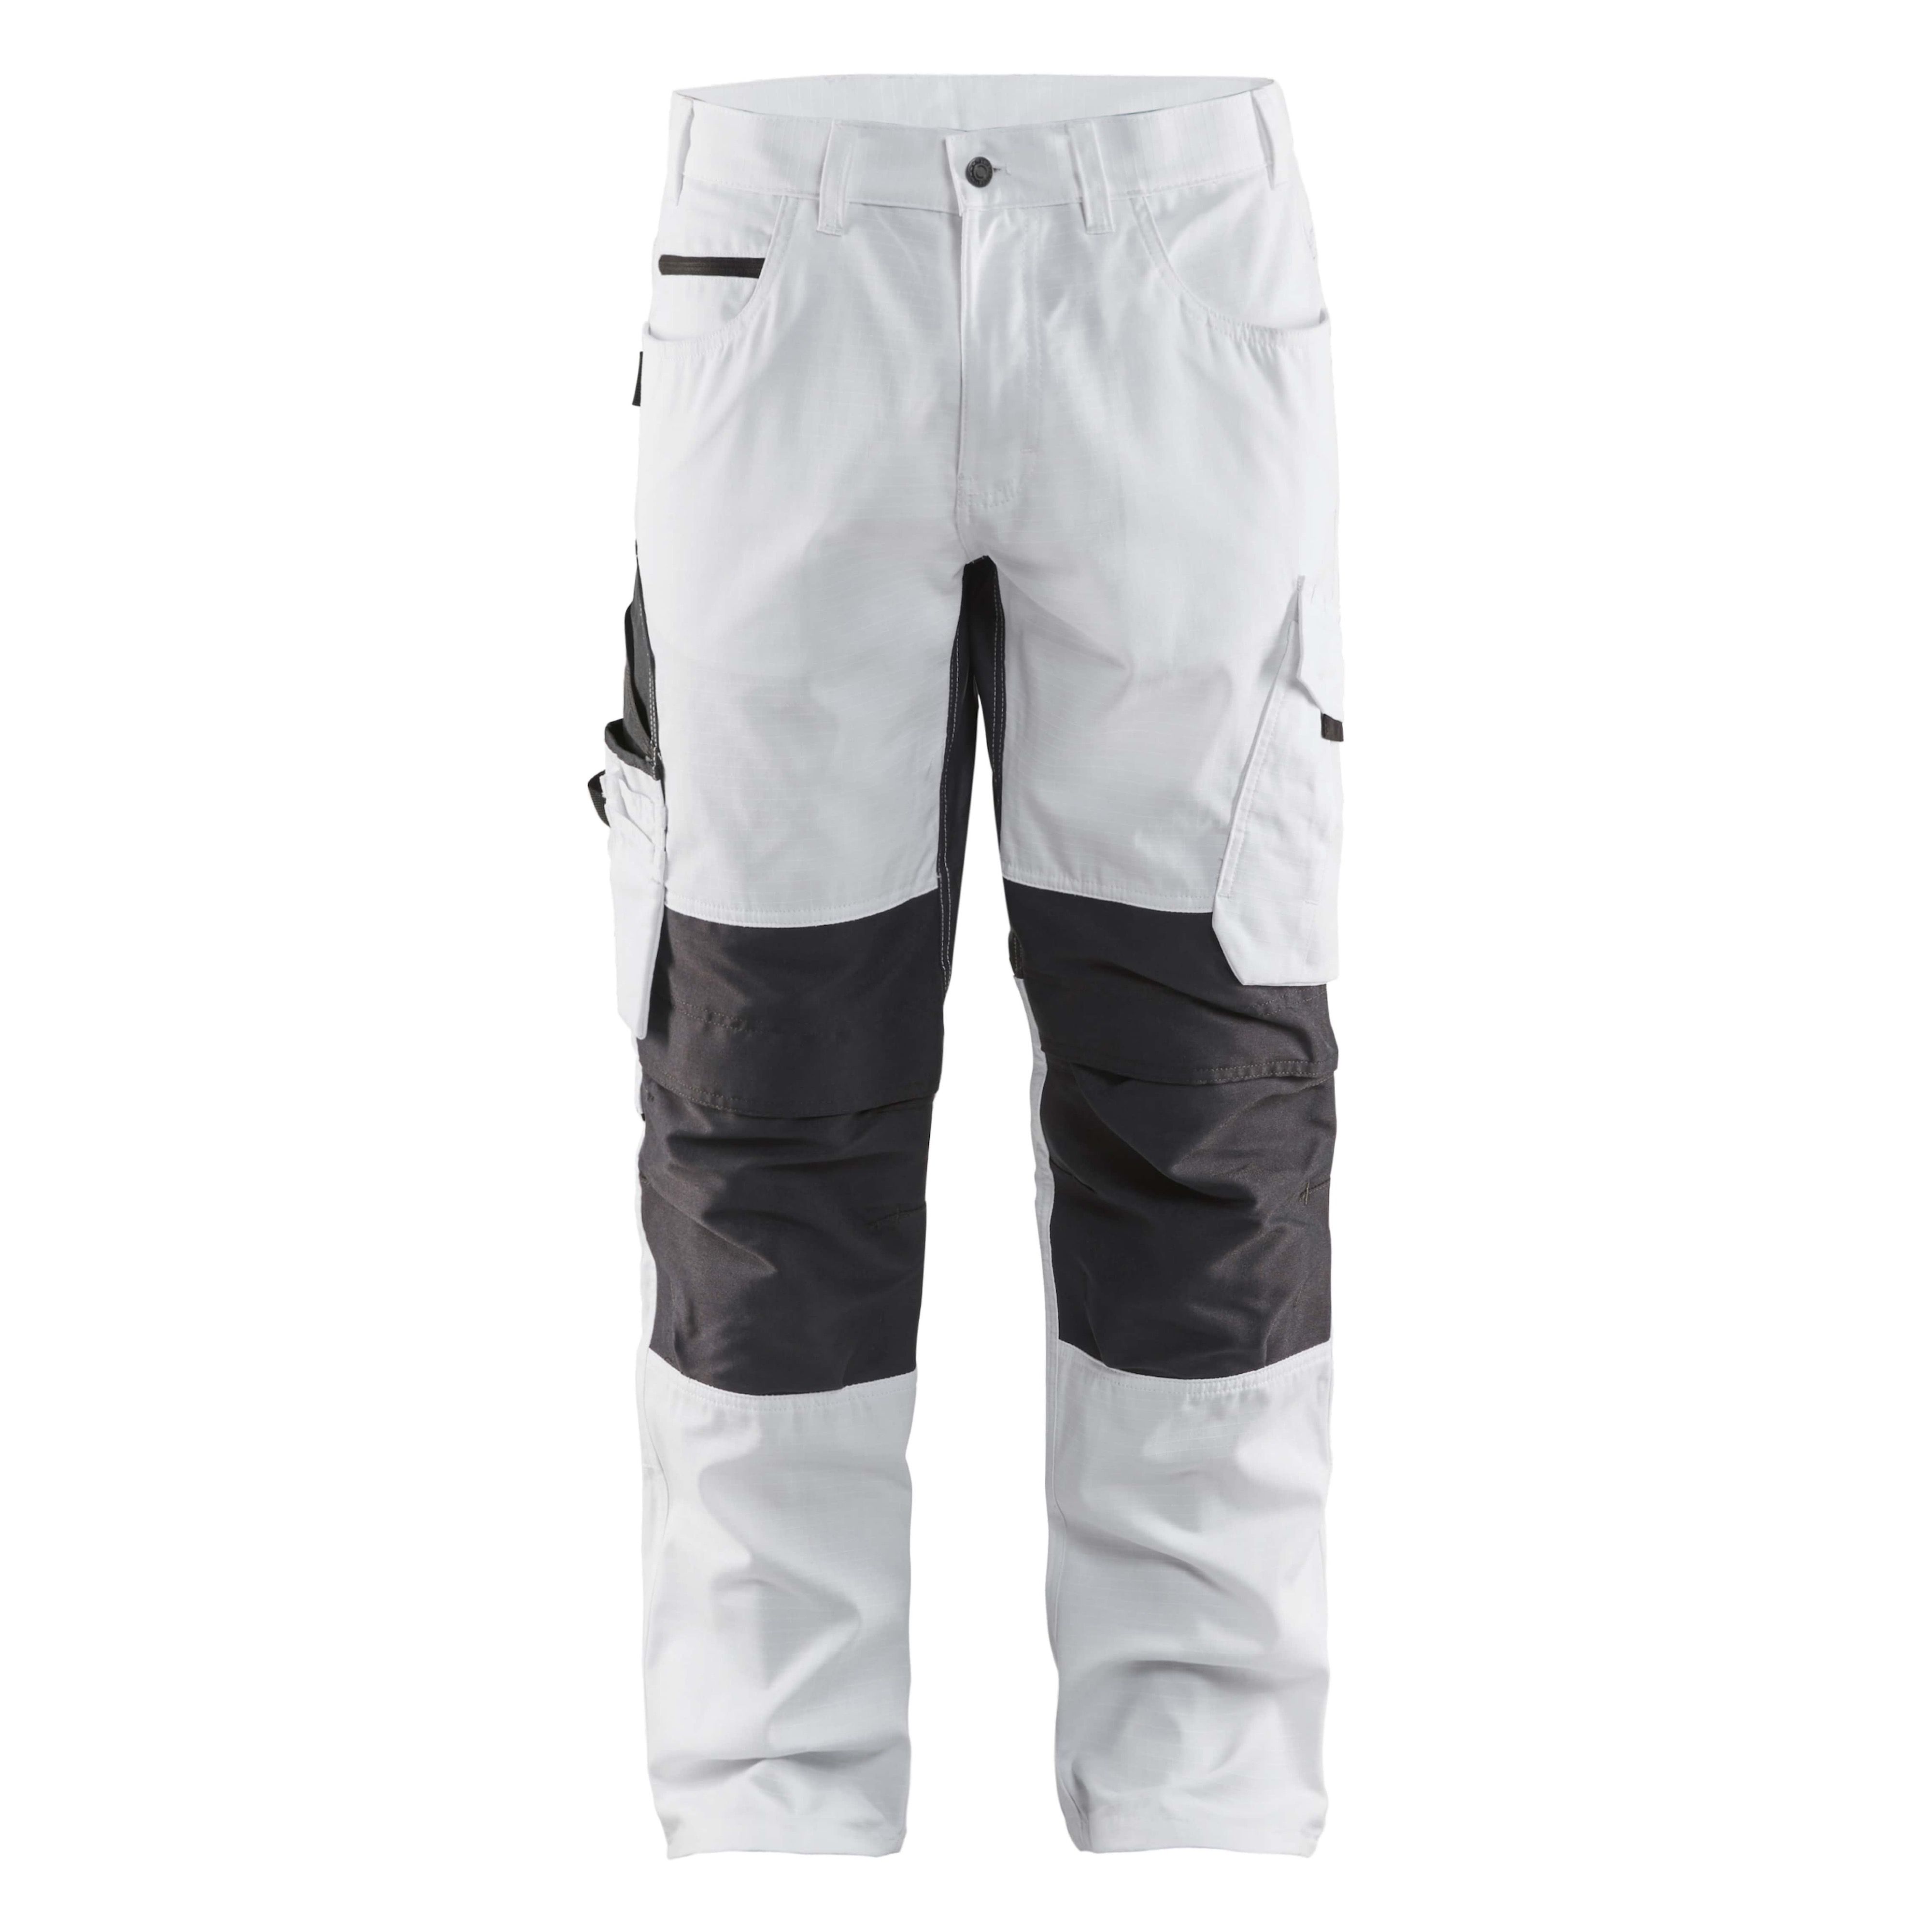 Blaklader Painters Trousers With Stretch - White / Dark Grey